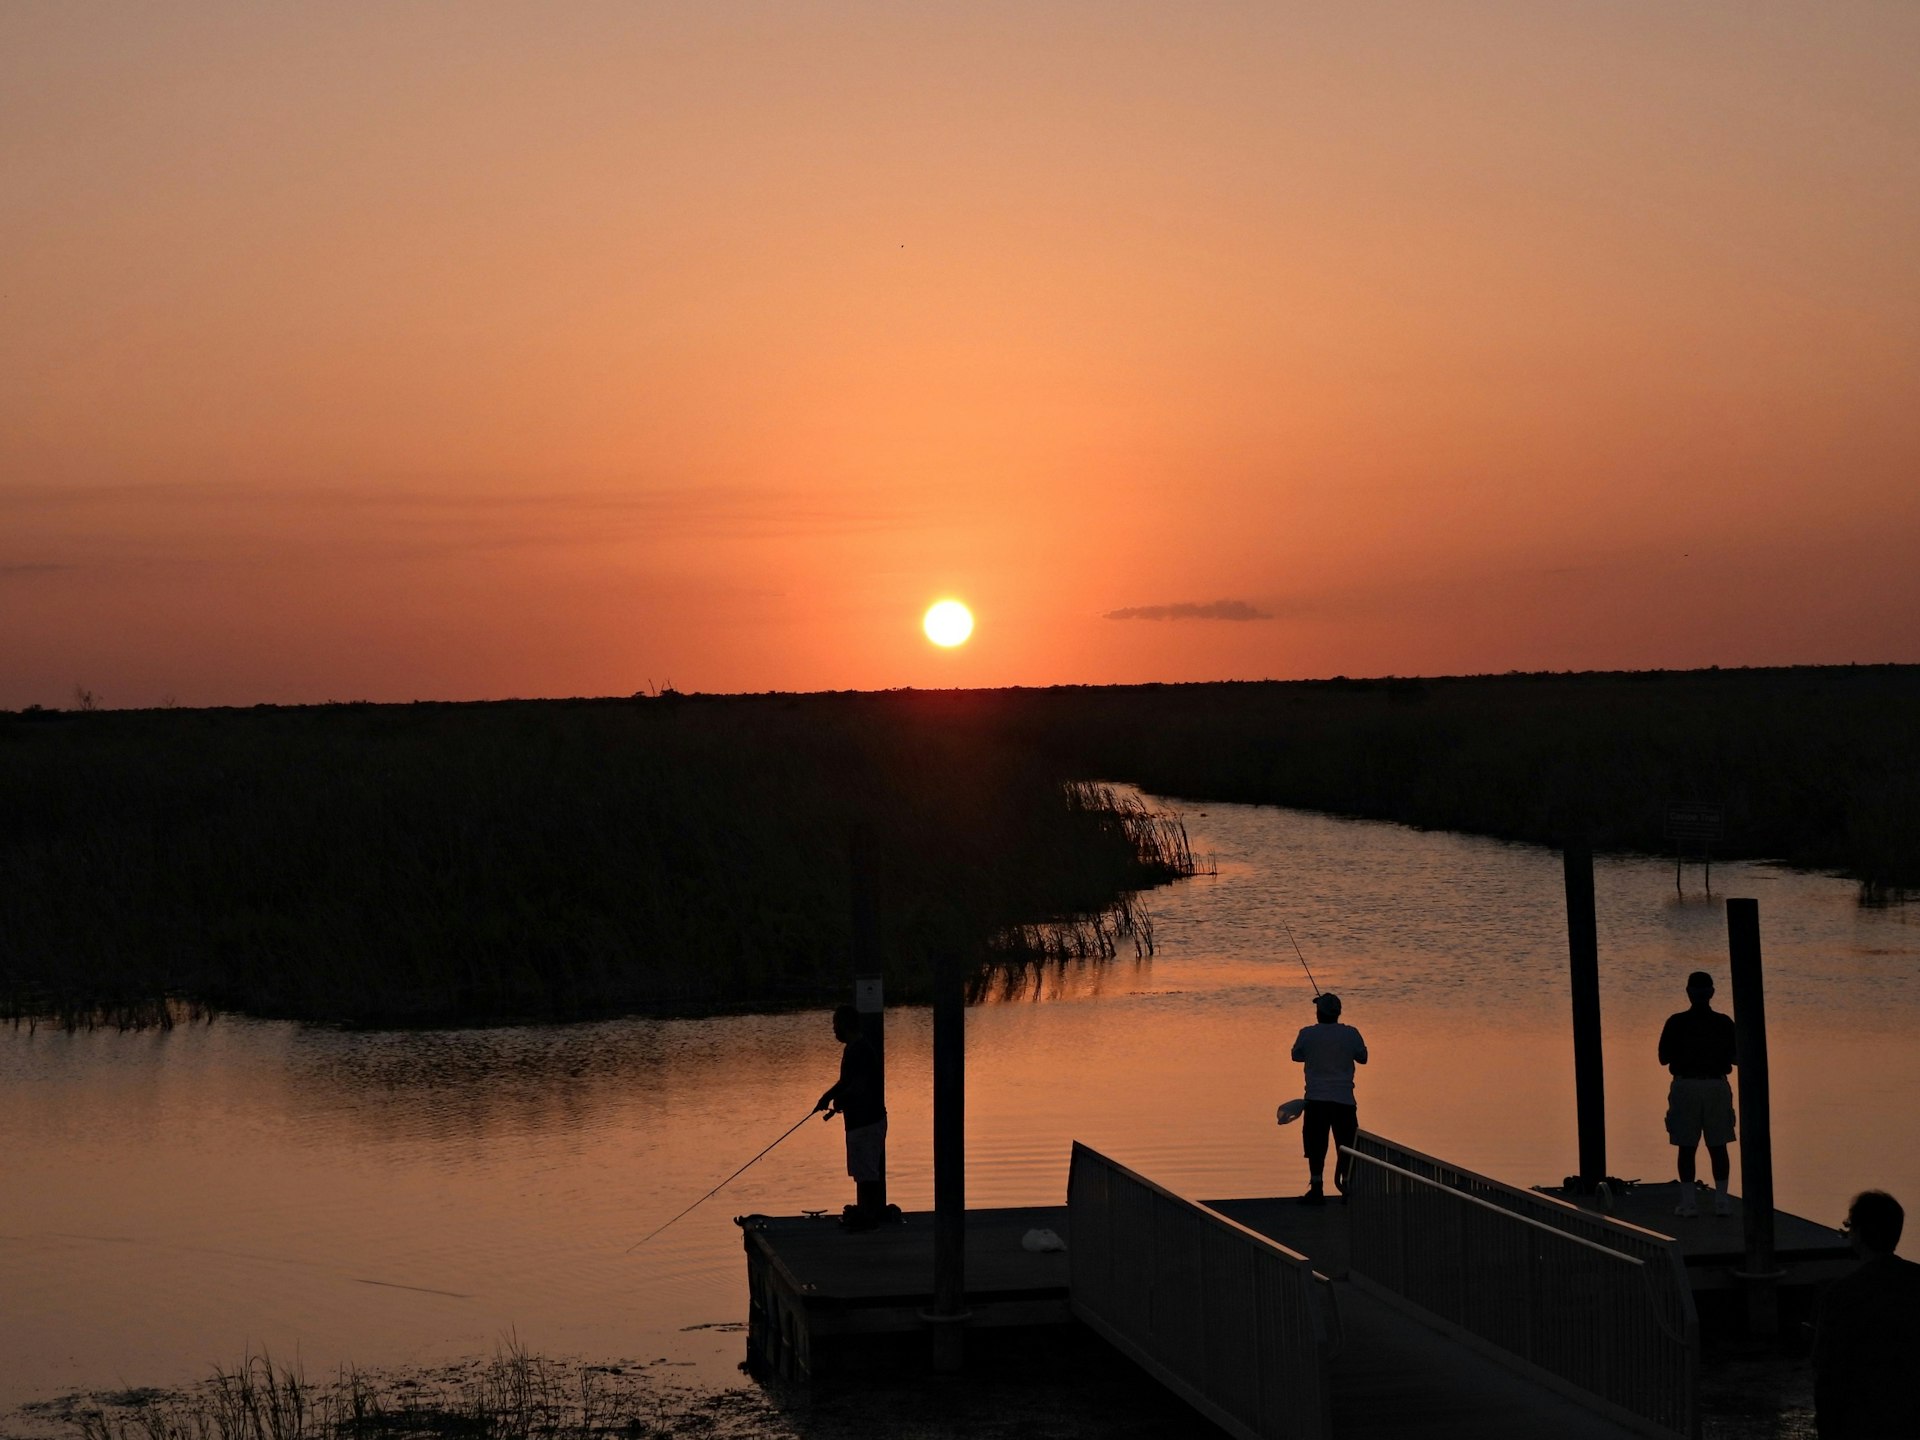 Sunset in the Florida Everglades with people in-silhouette fishing from the dock